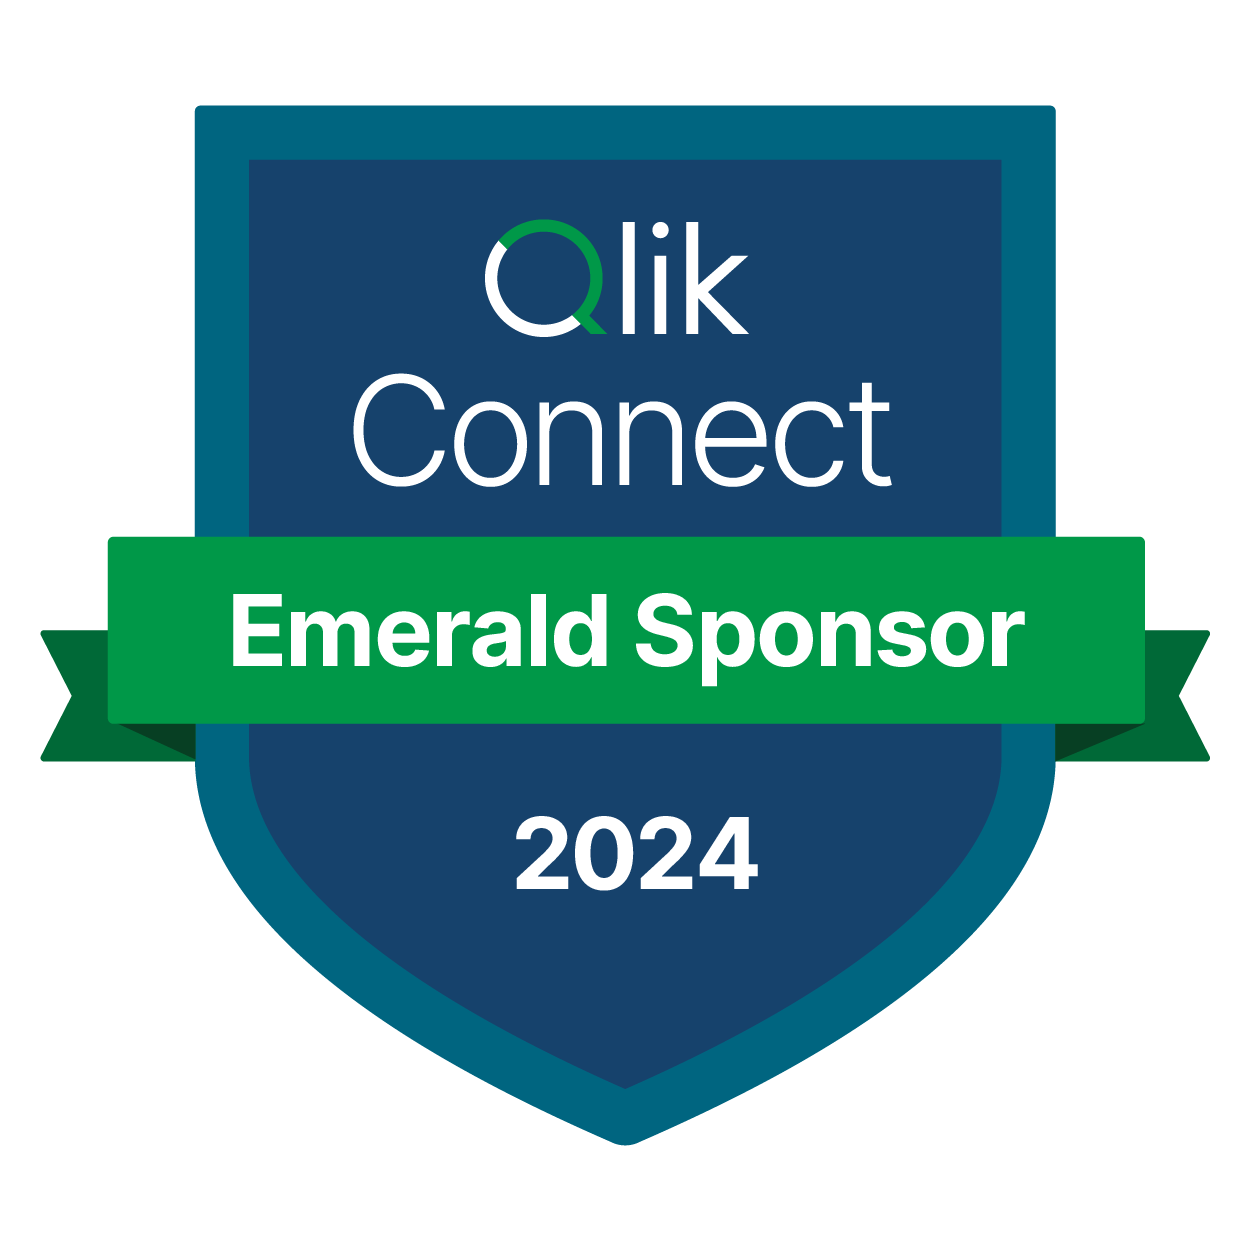 AnyChart is an Emerald Sponsor of Qlik Connect 2024